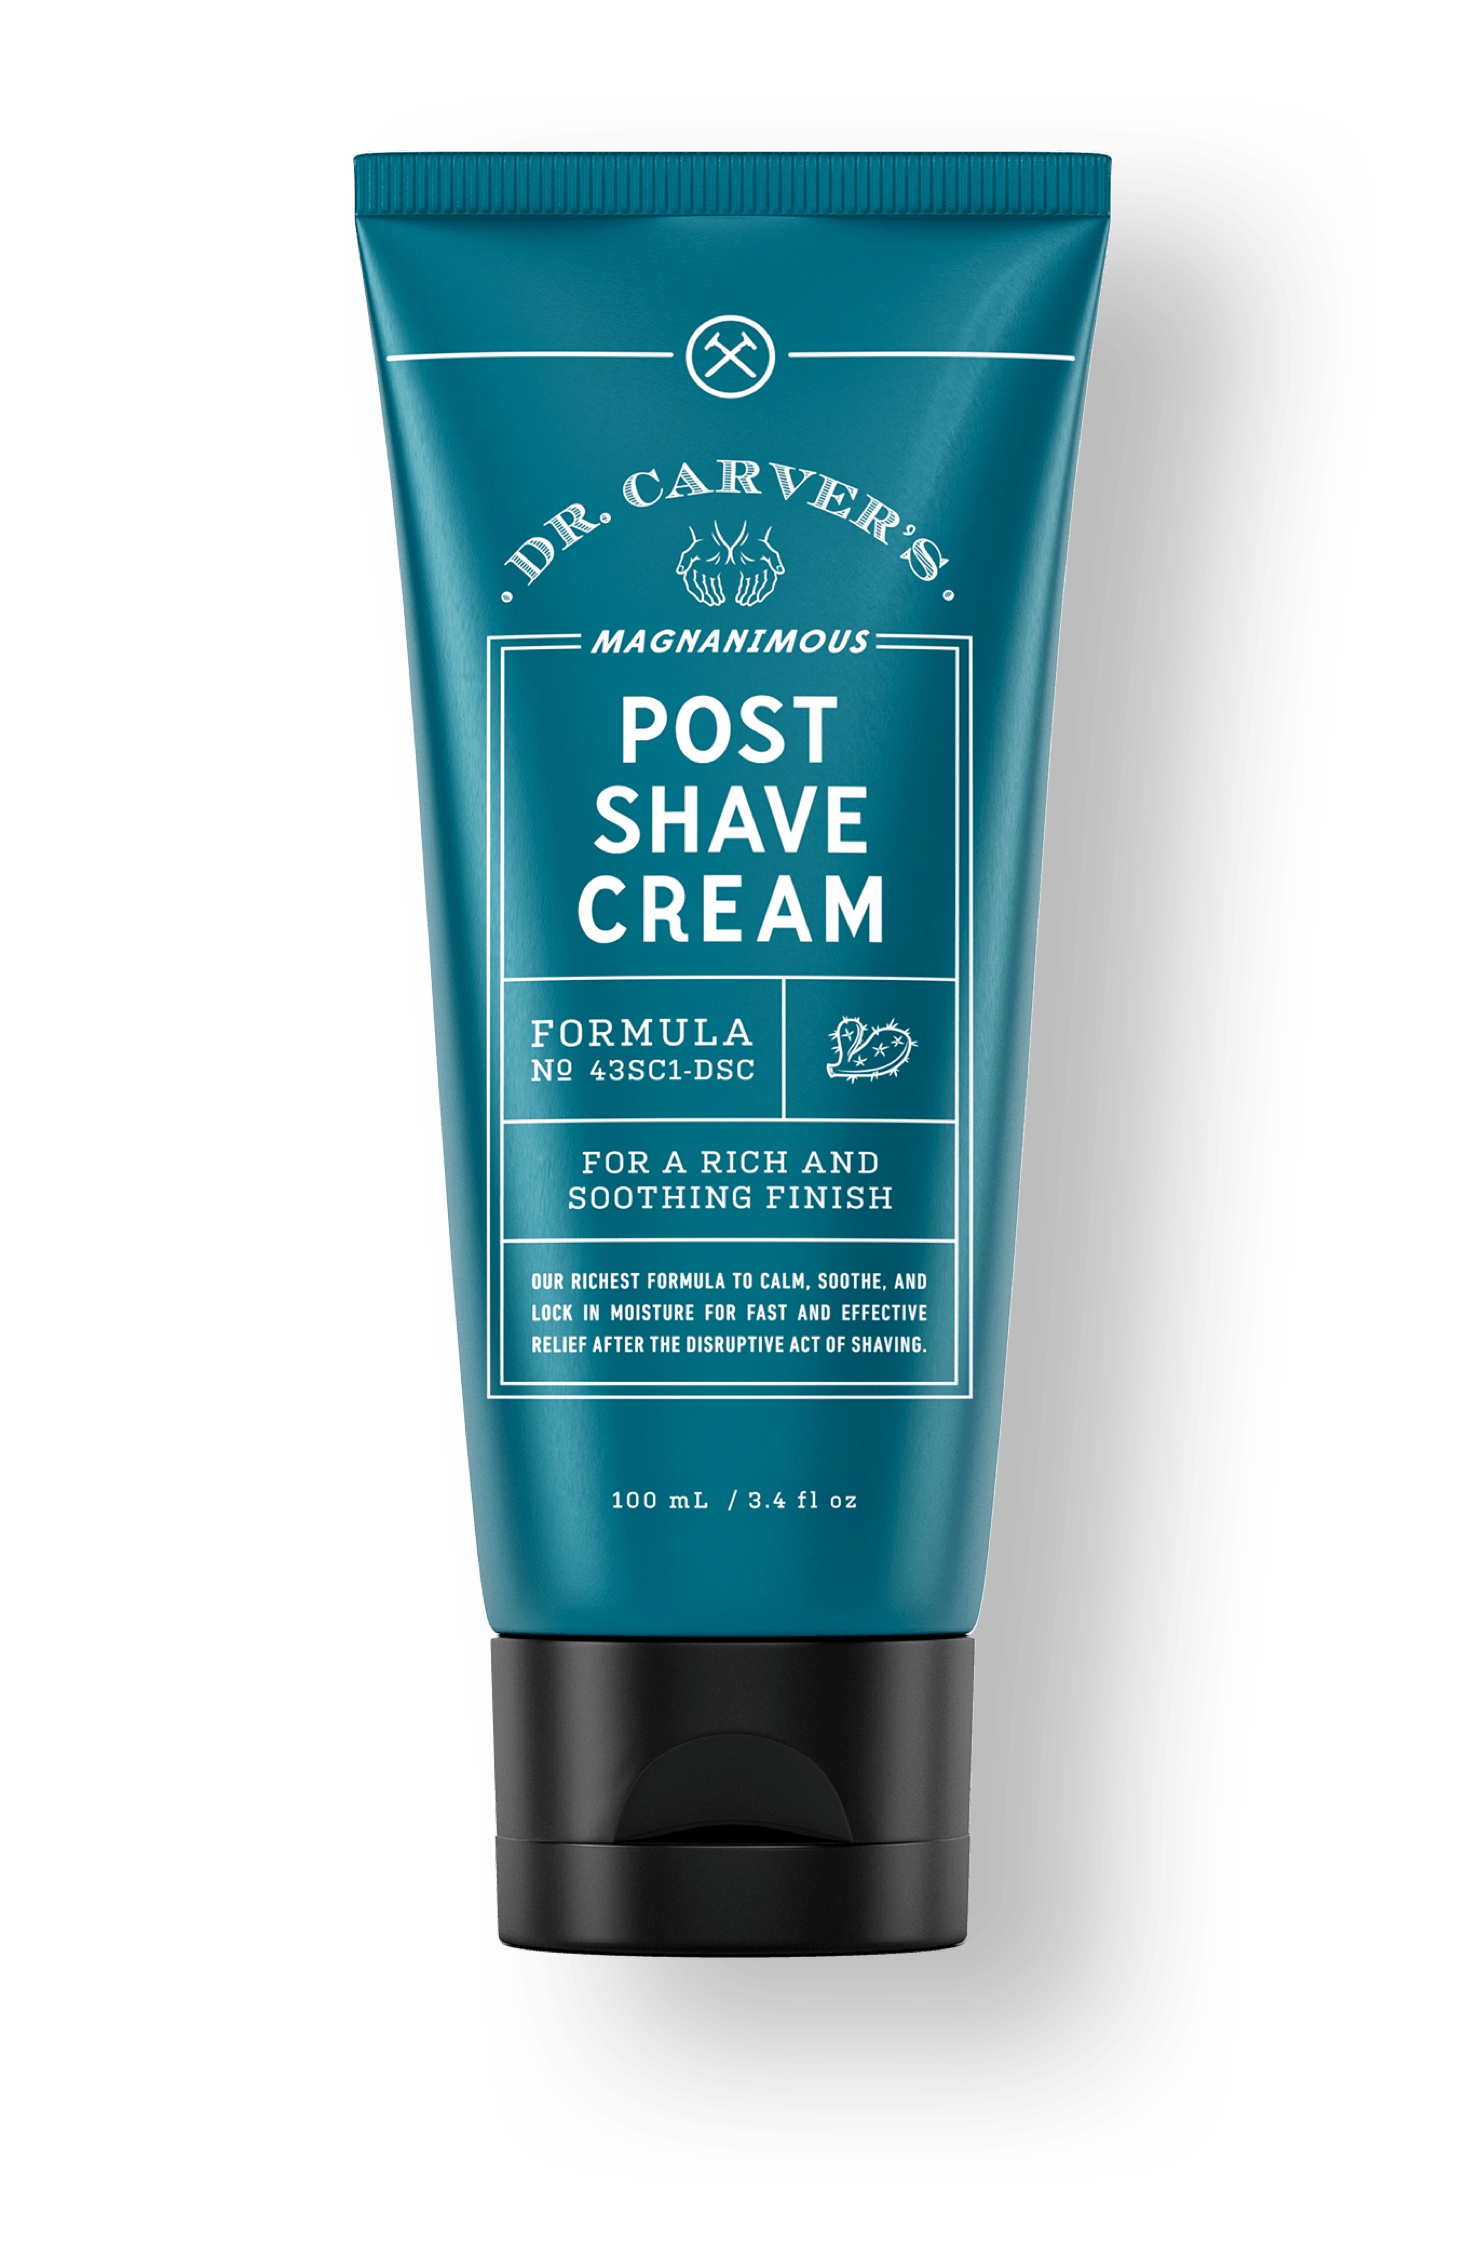 Dr. Carver's Post Shave Cream